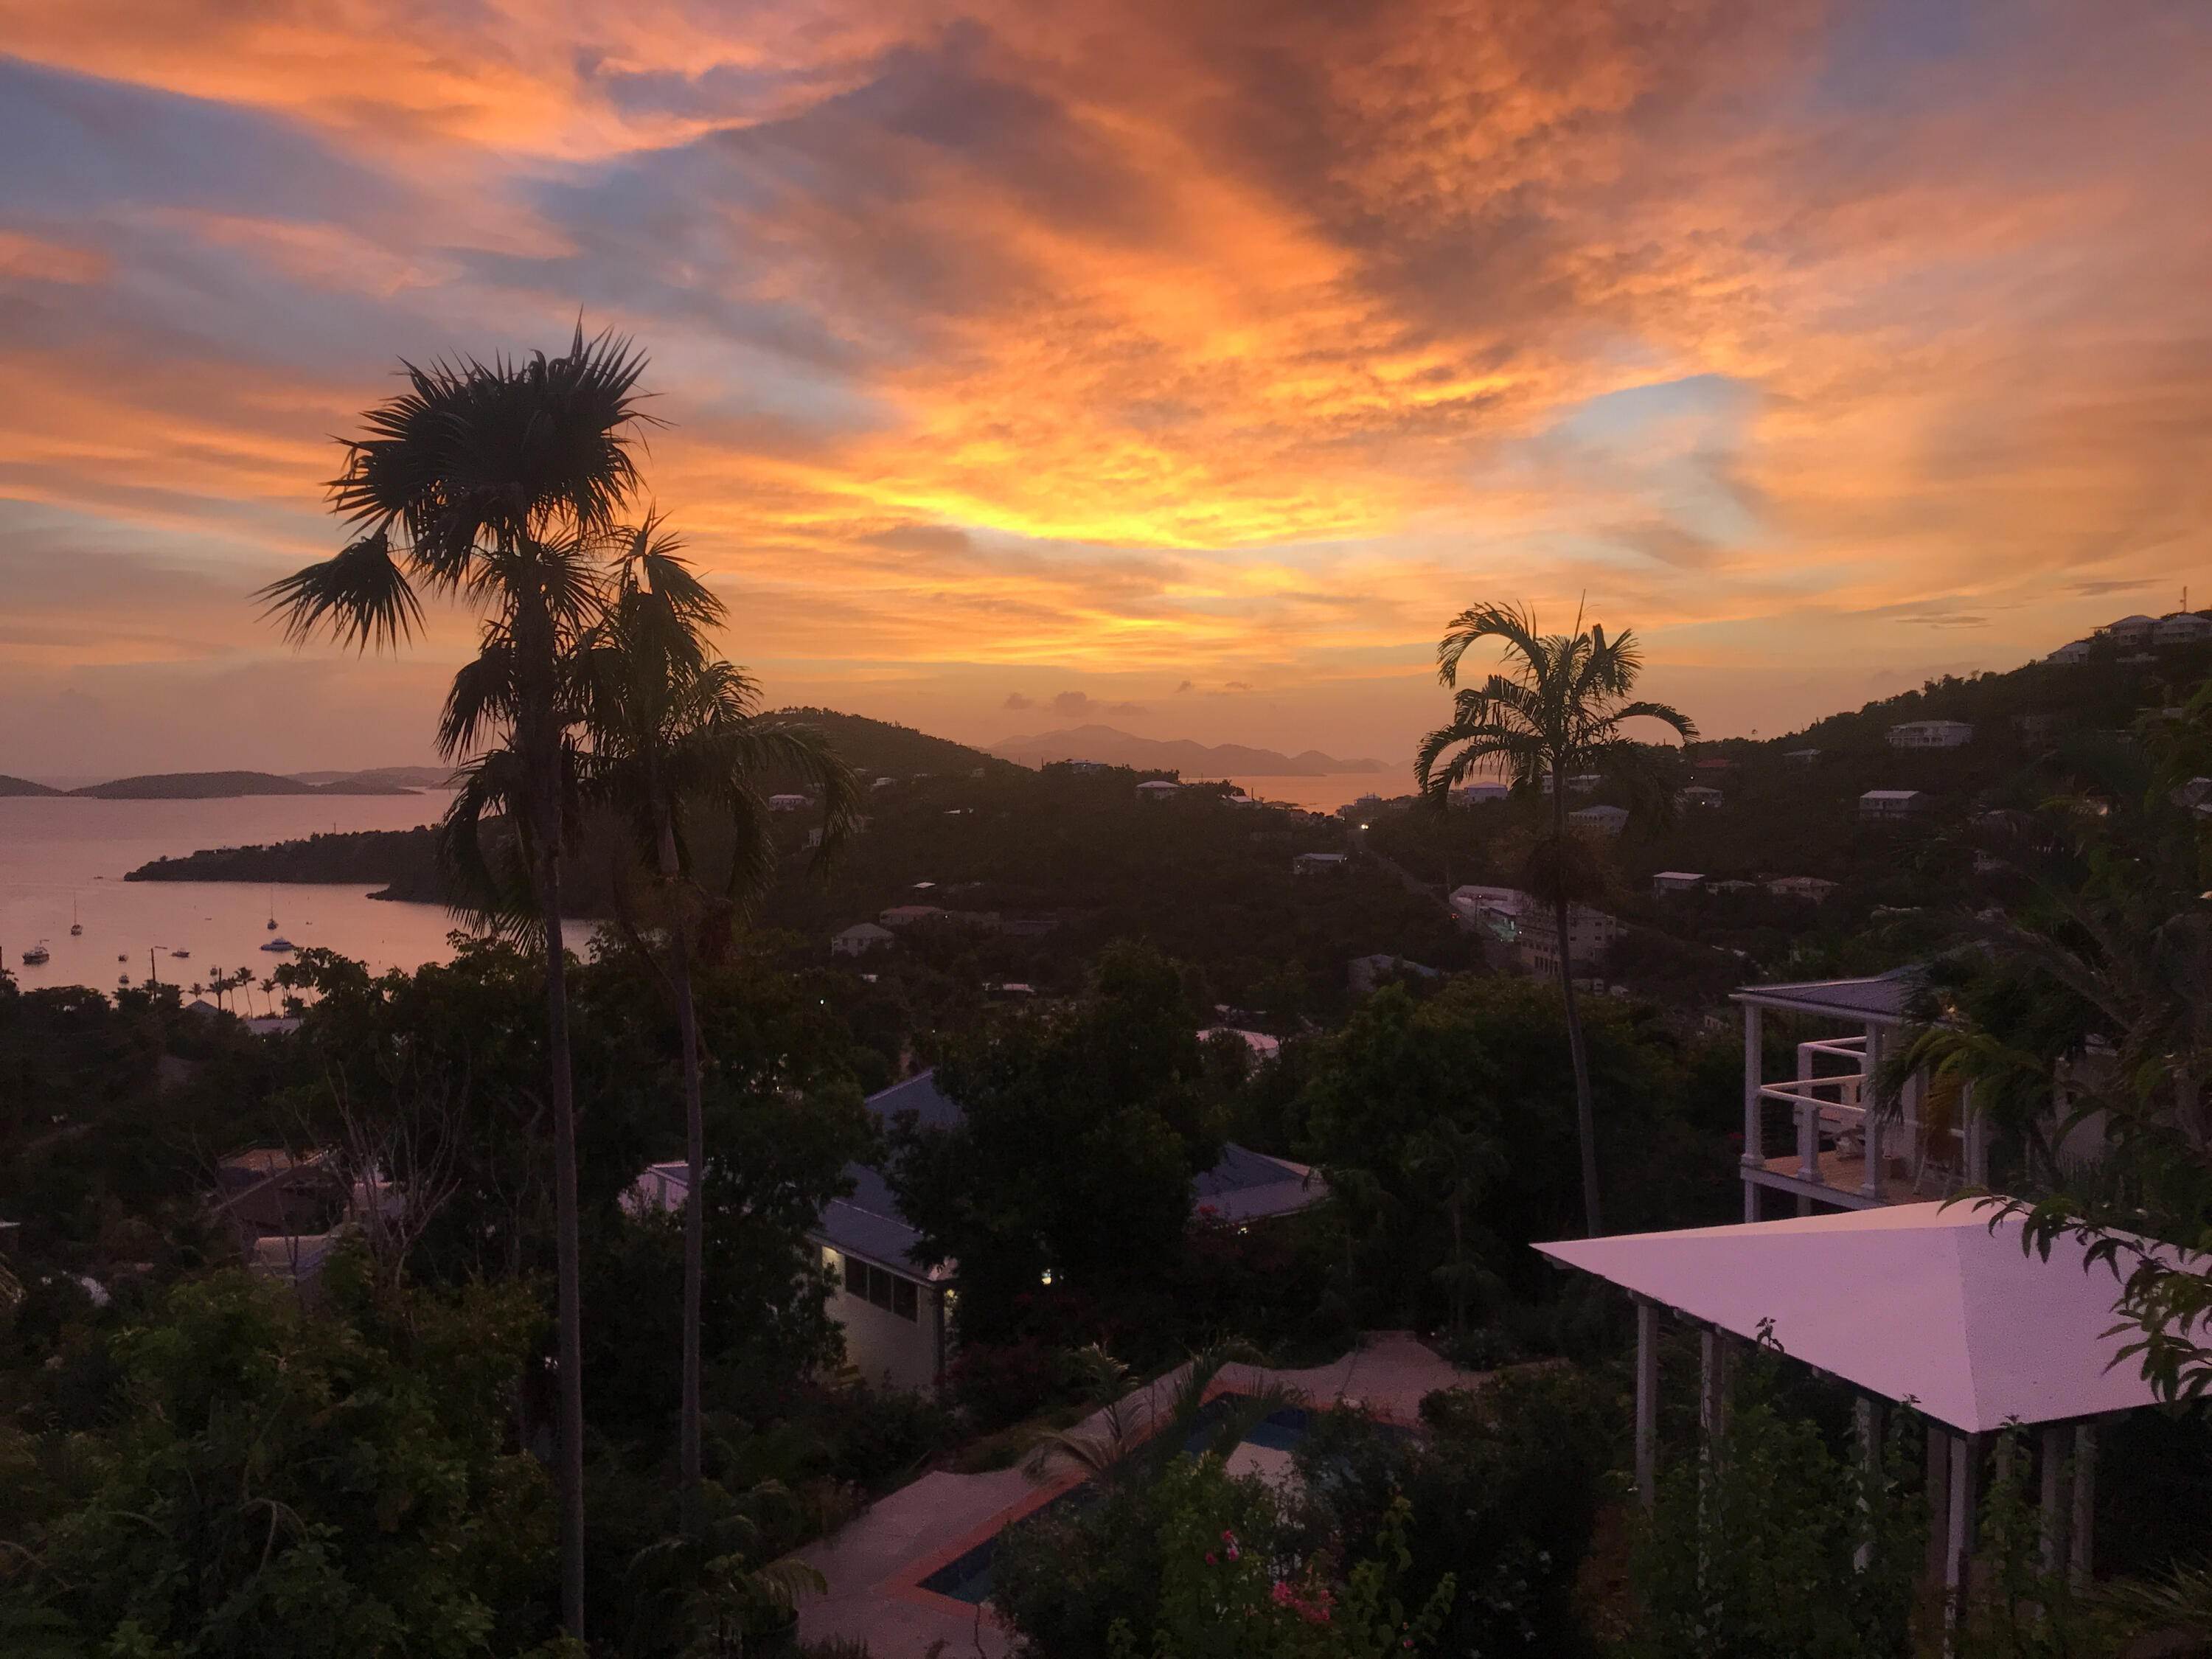 24. Single Family Homes for Sale at Chocolate Hole St John, Virgin Islands 00830 United States Virgin Islands